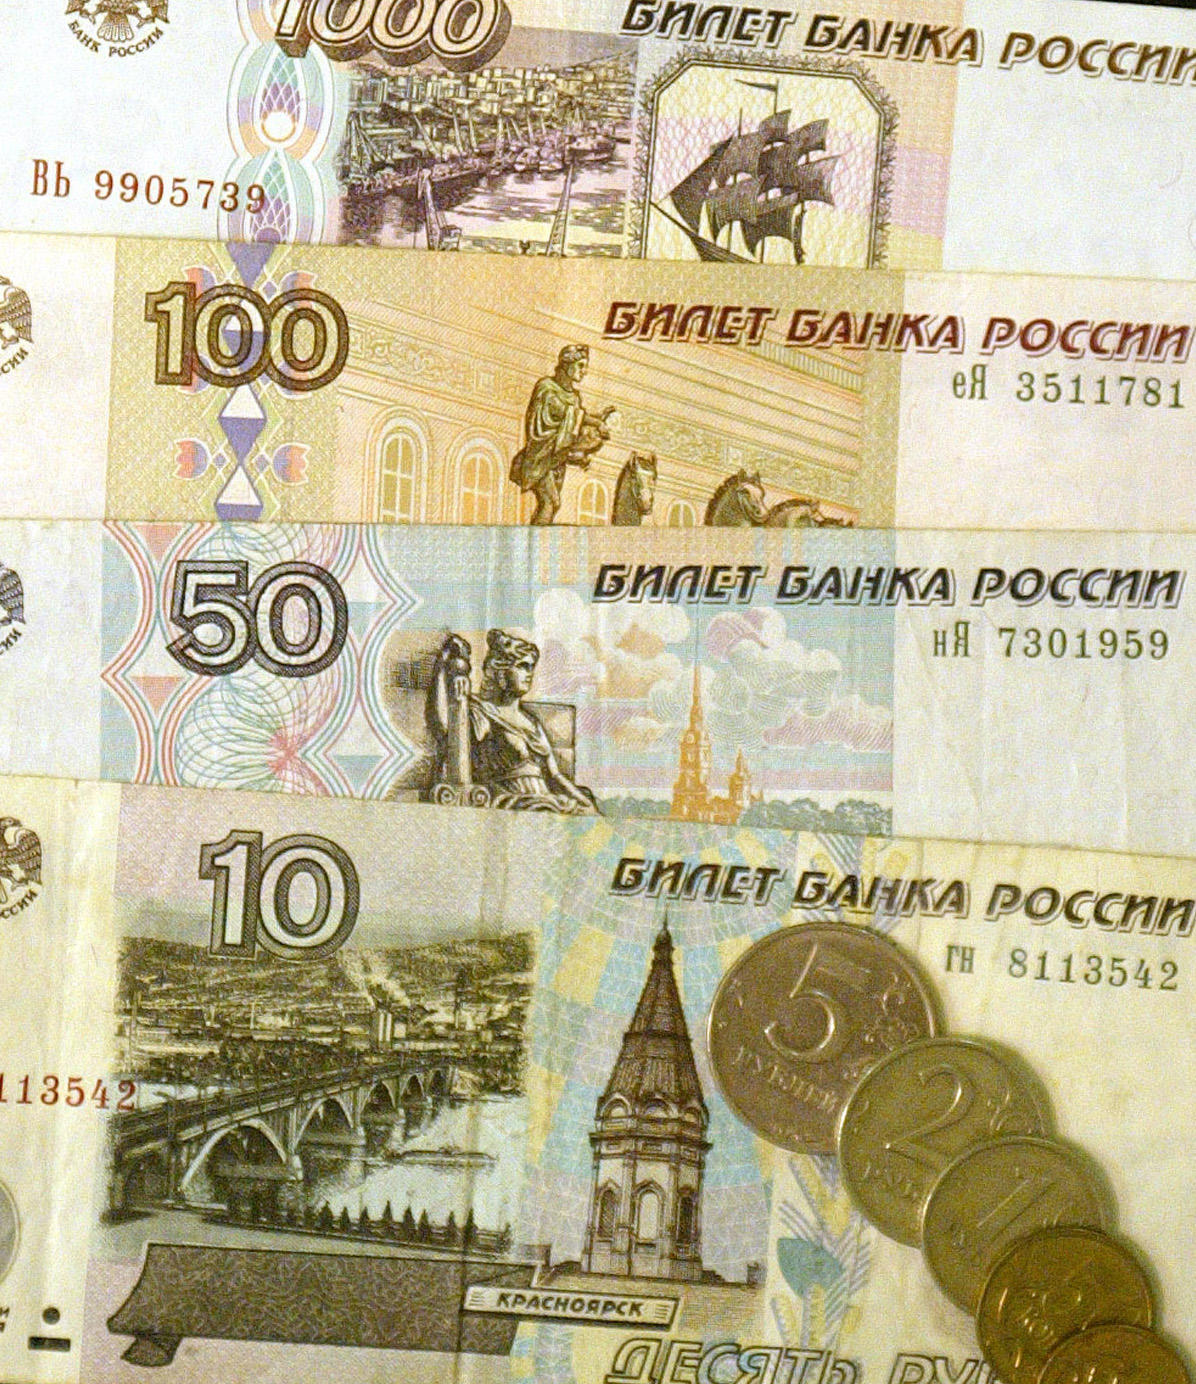 The Russian rouble has seen wider price swings this month.